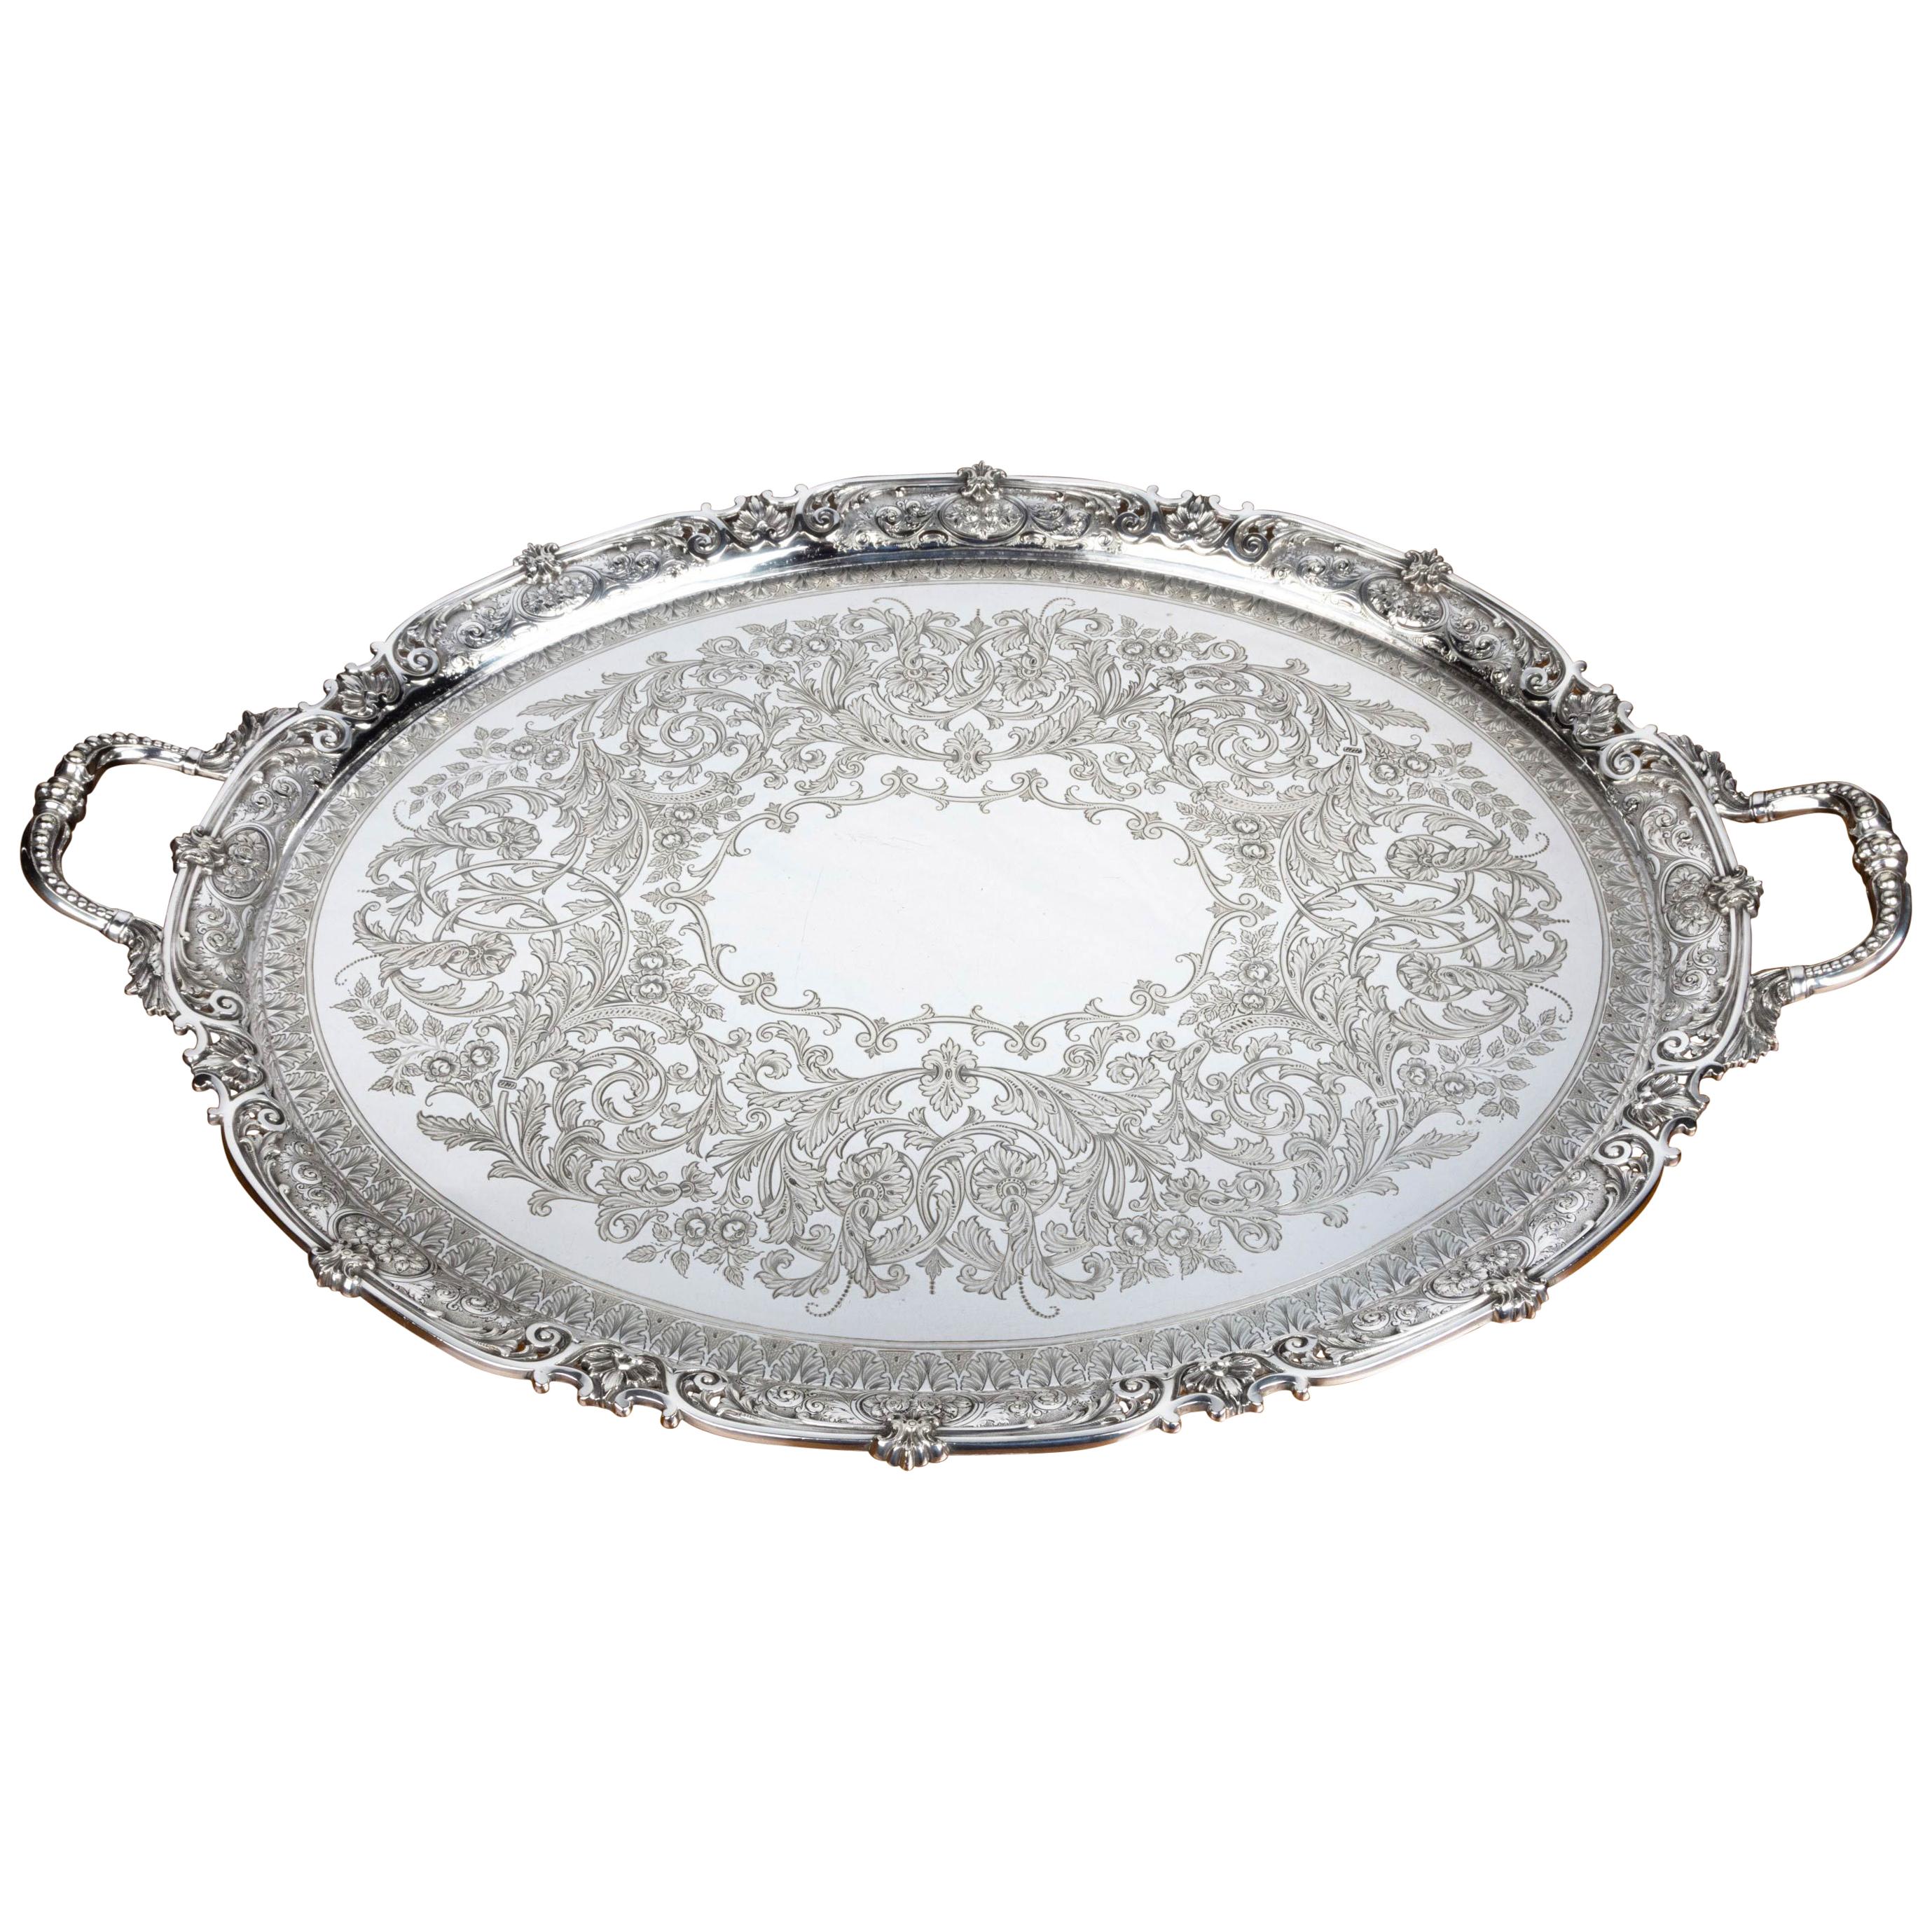 A Particularly Fine Quality Late Nineteenth Century, Large Oval Tray